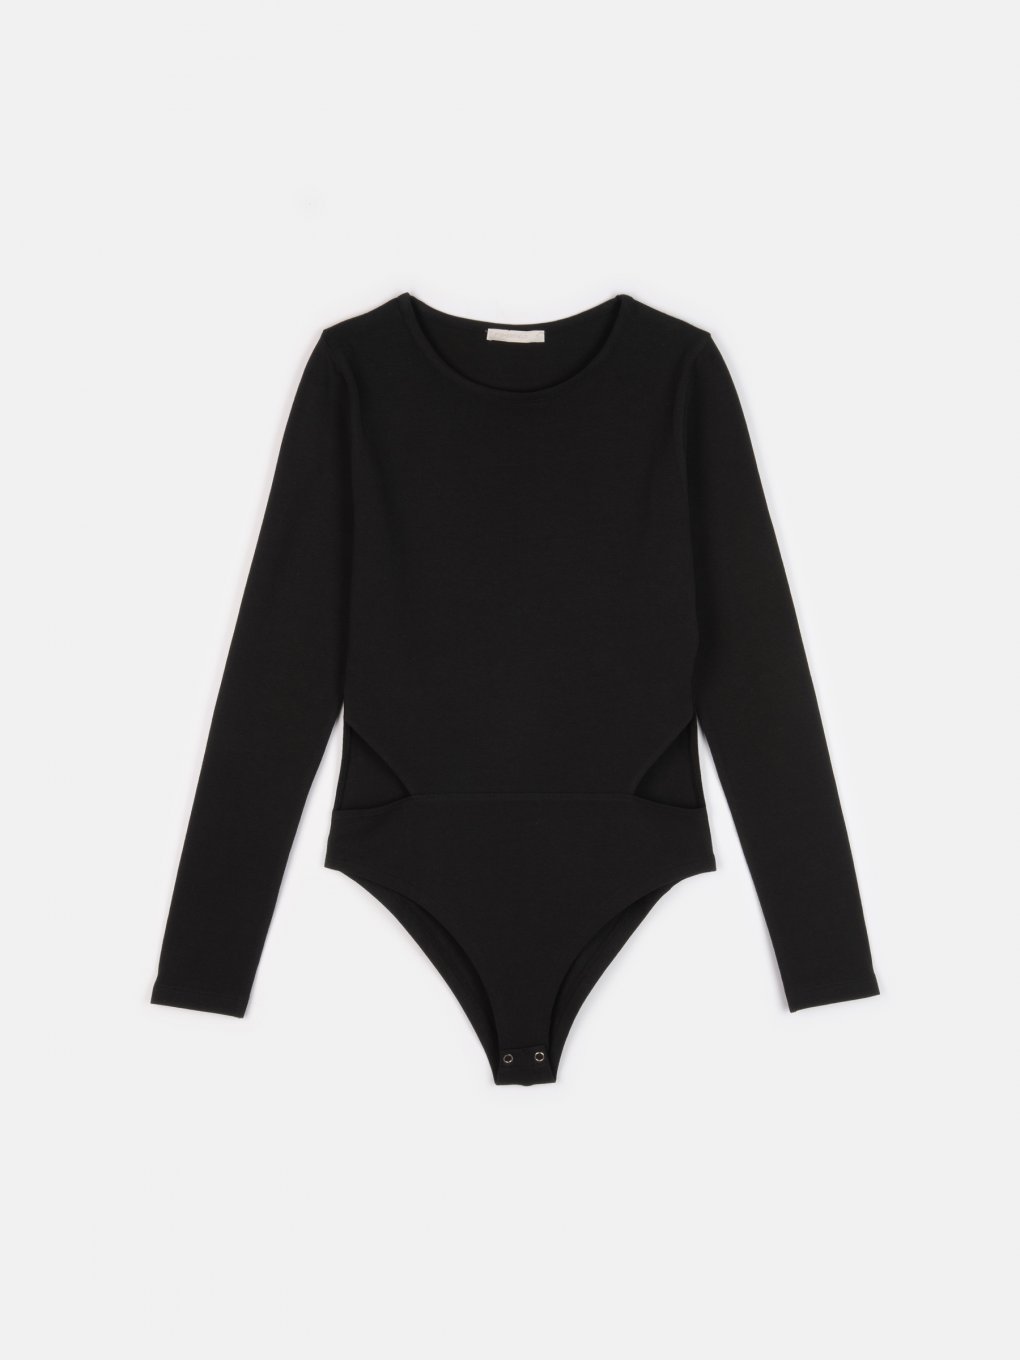 Cut out stretchy long sleeve bodysuit